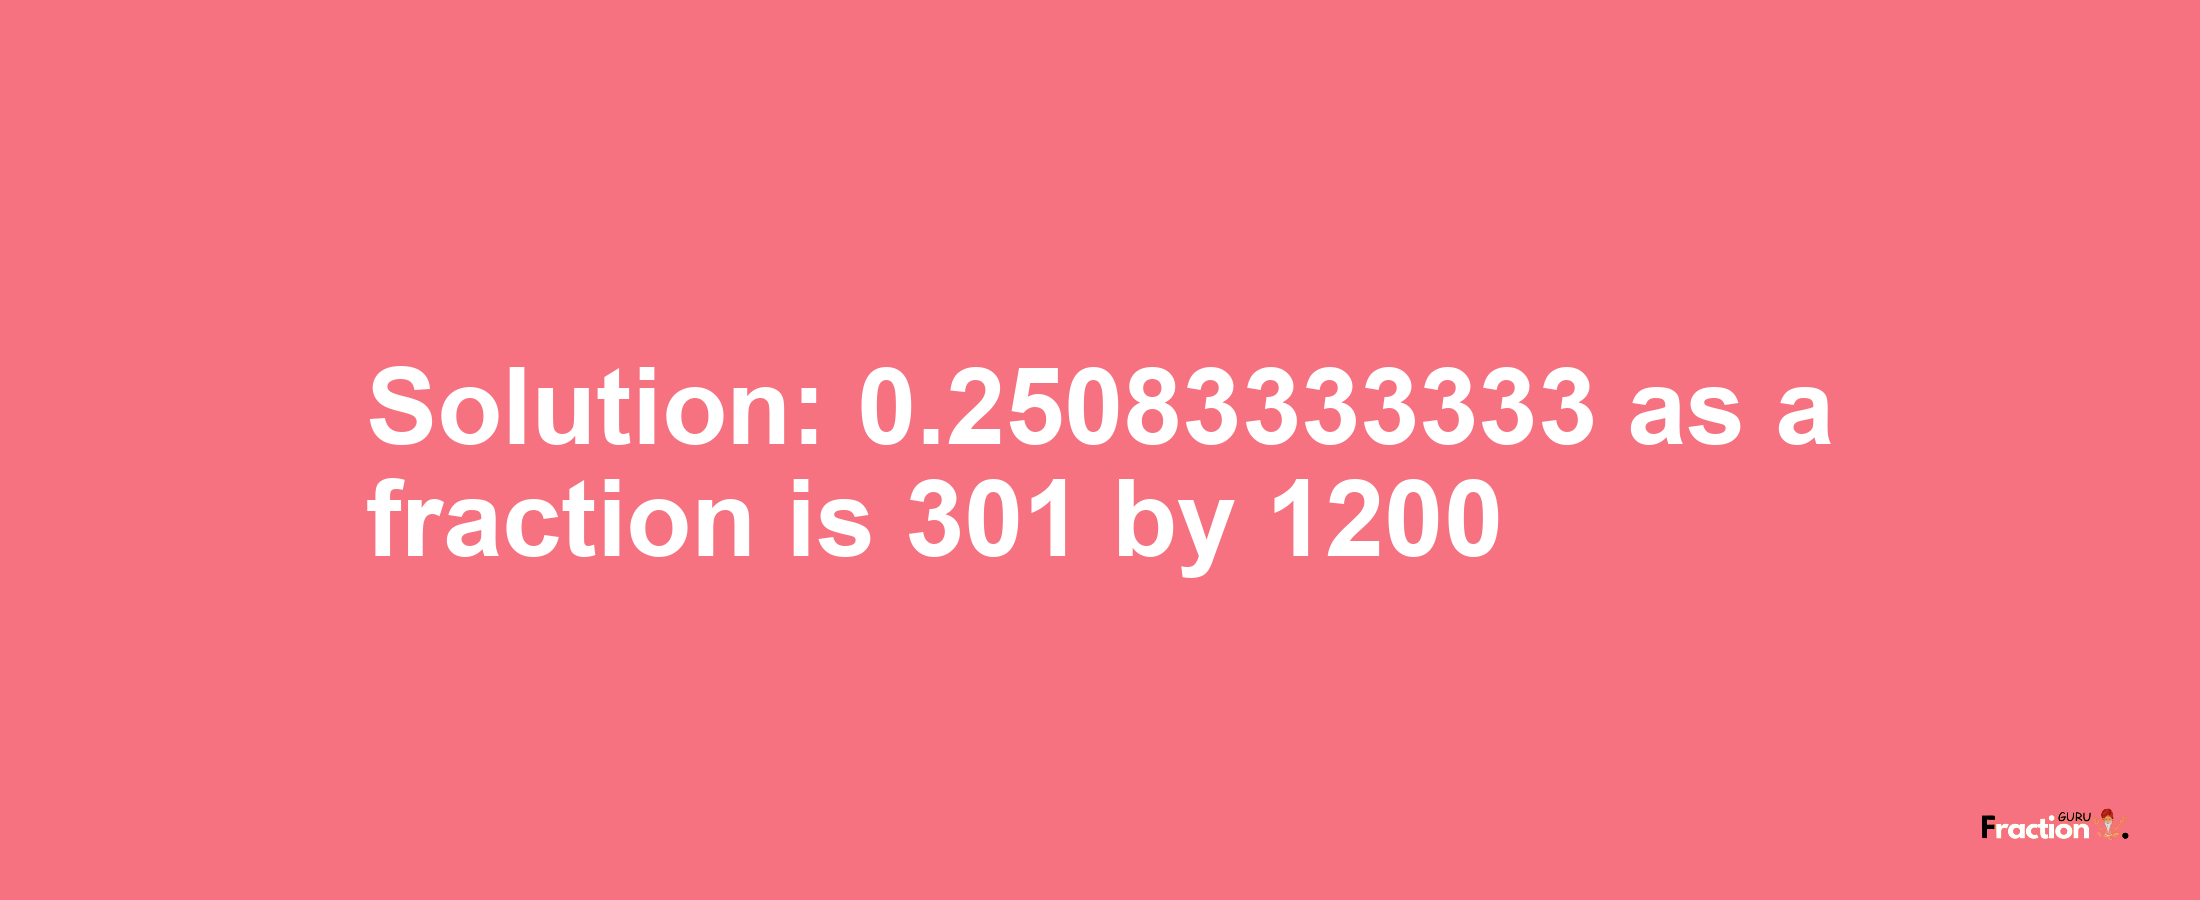 Solution:0.25083333333 as a fraction is 301/1200